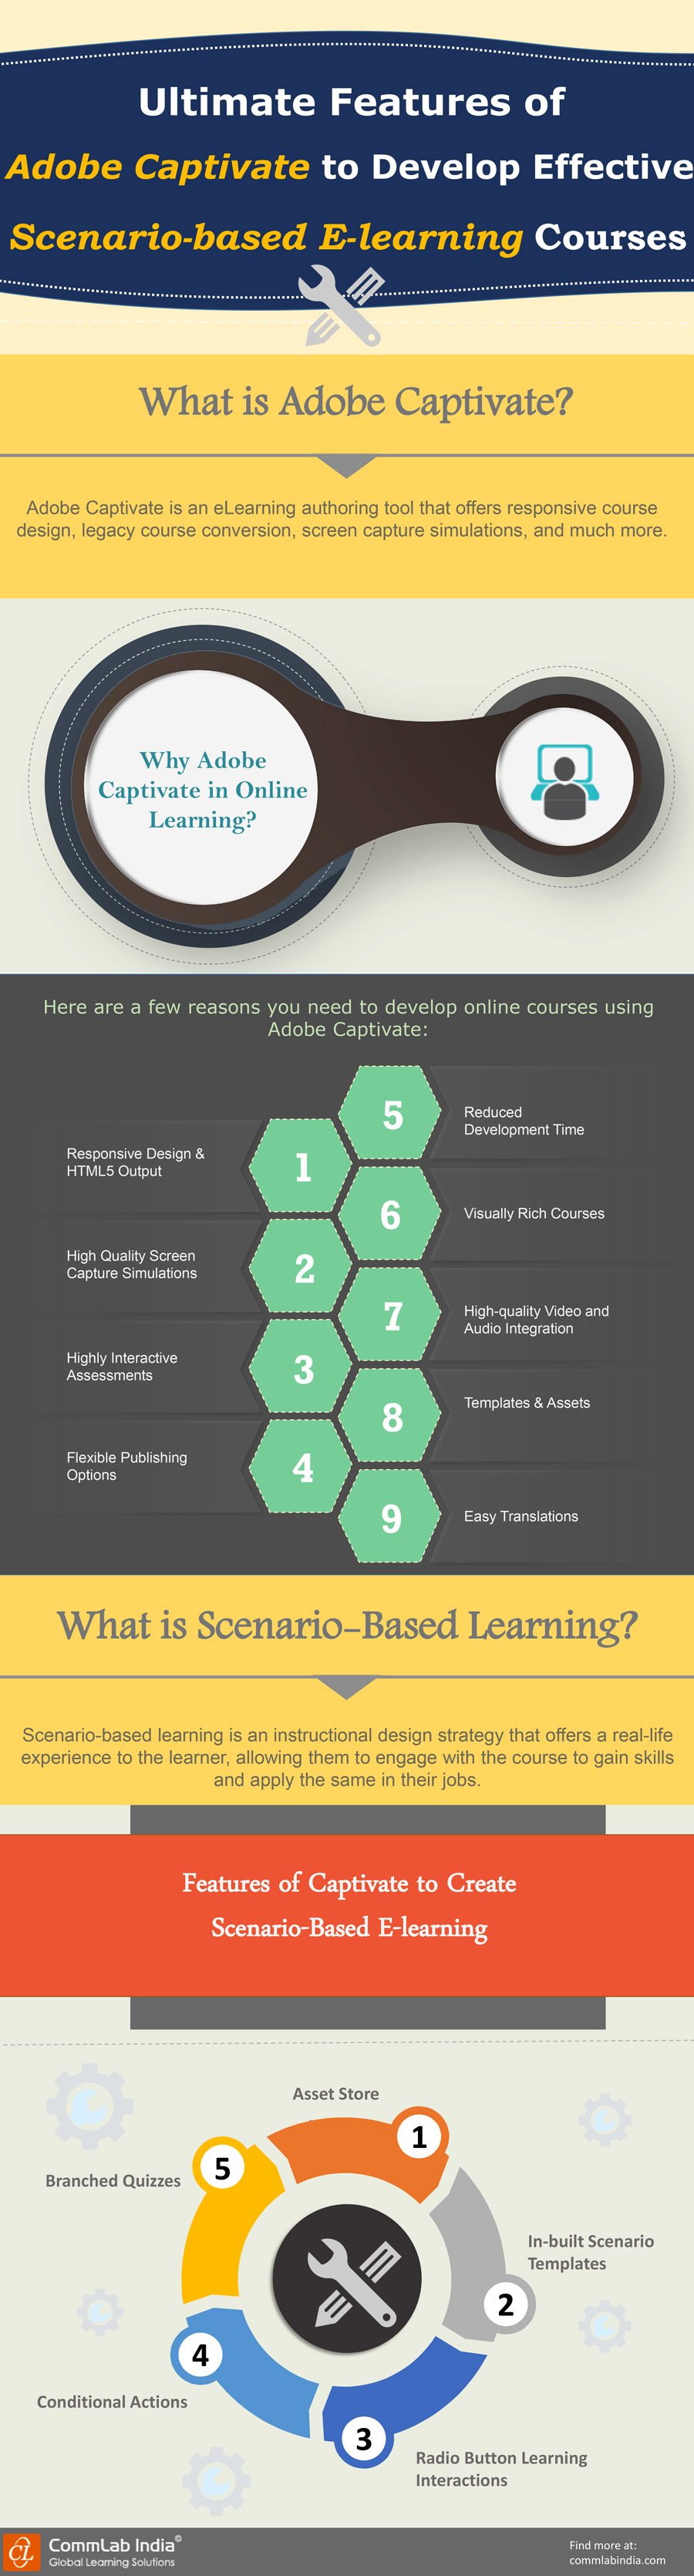 Ultimate Features of Adobe Captivate to Develop Engaging Scenario-based E-learning Courses[Infographic]